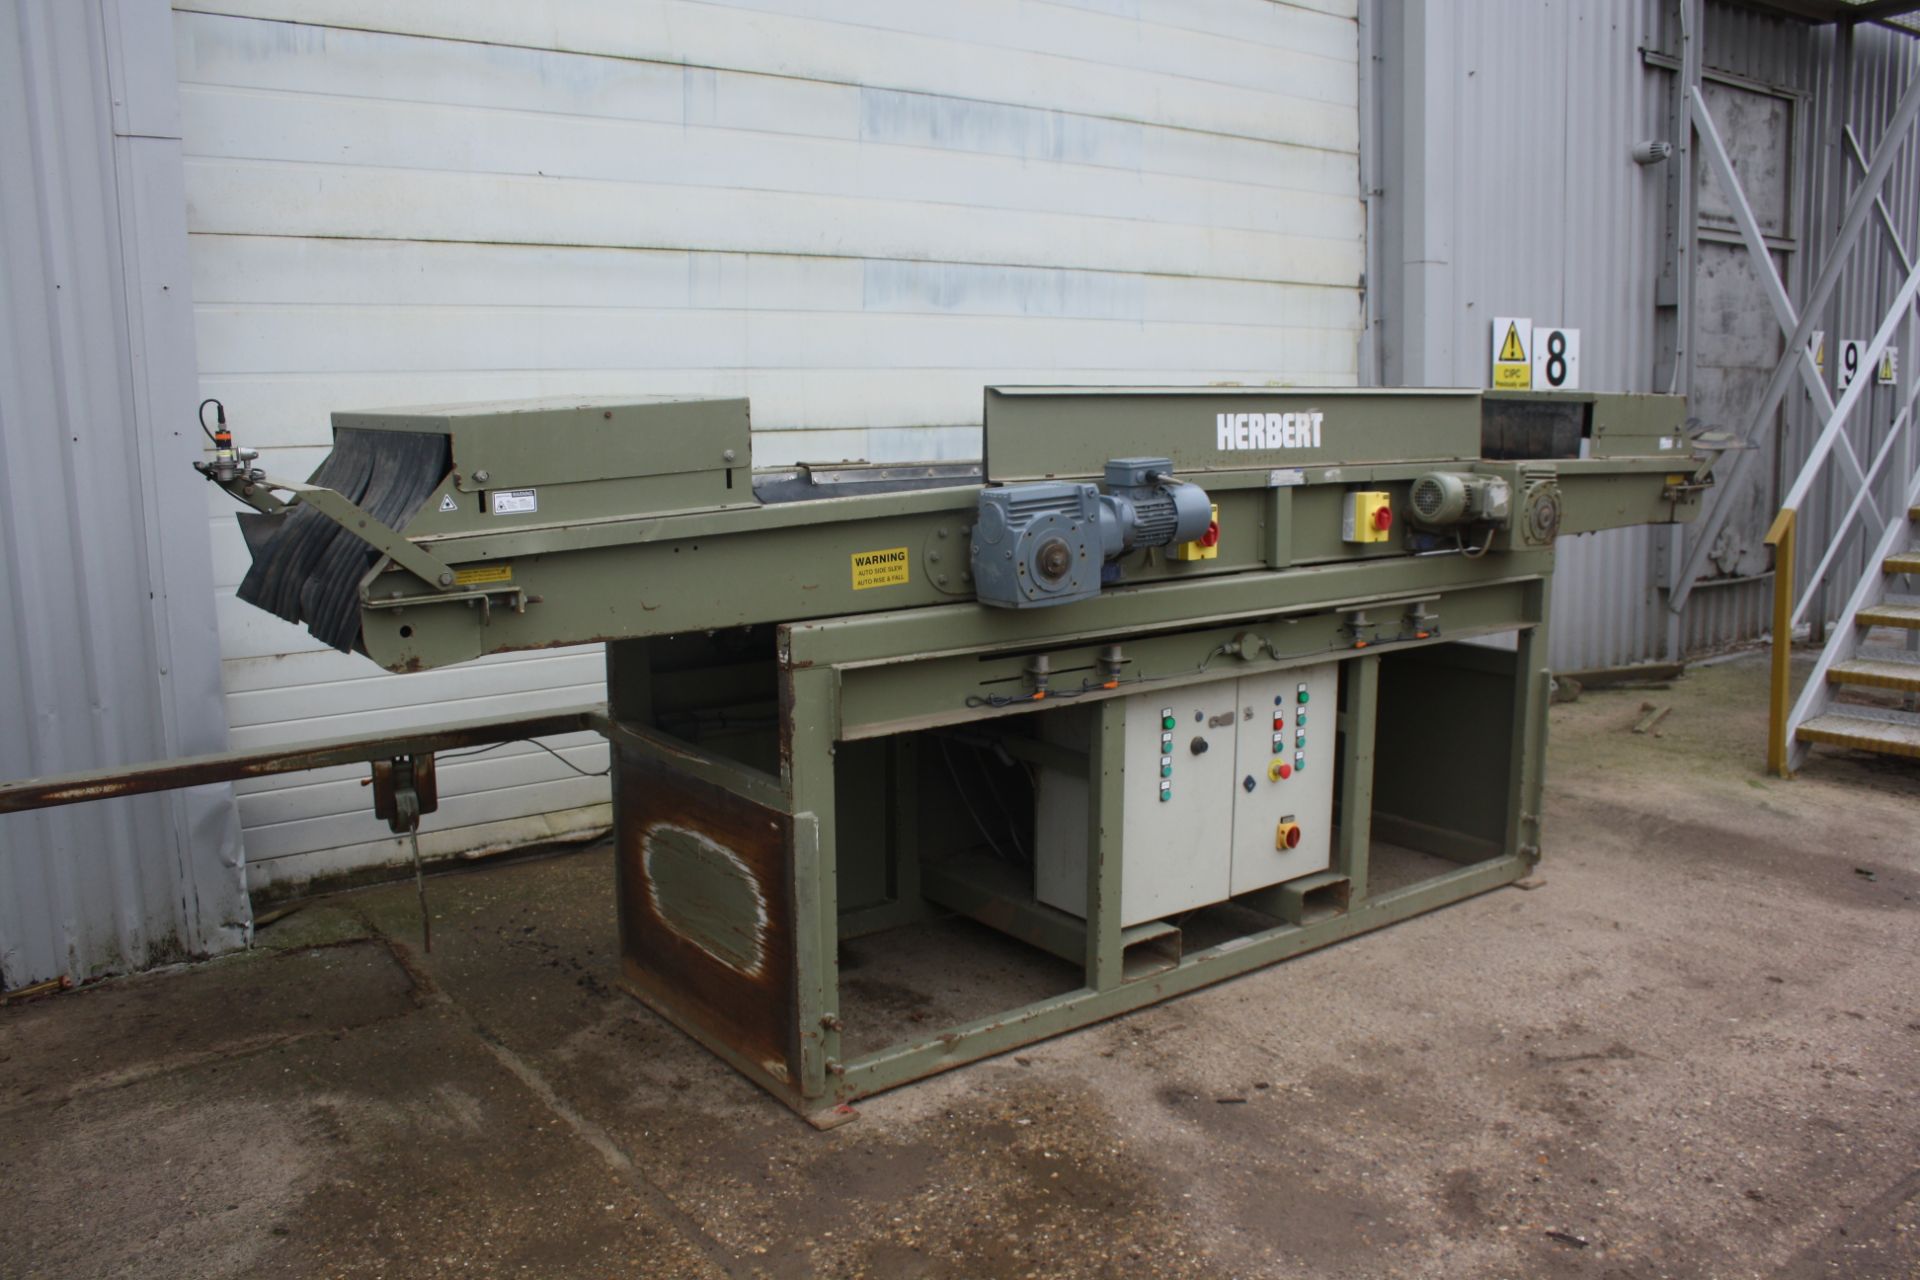 Herbert box filler, auto slew, auto rise and fall Serial No 076-05-002 Type BFTDETC 4.5711, passed